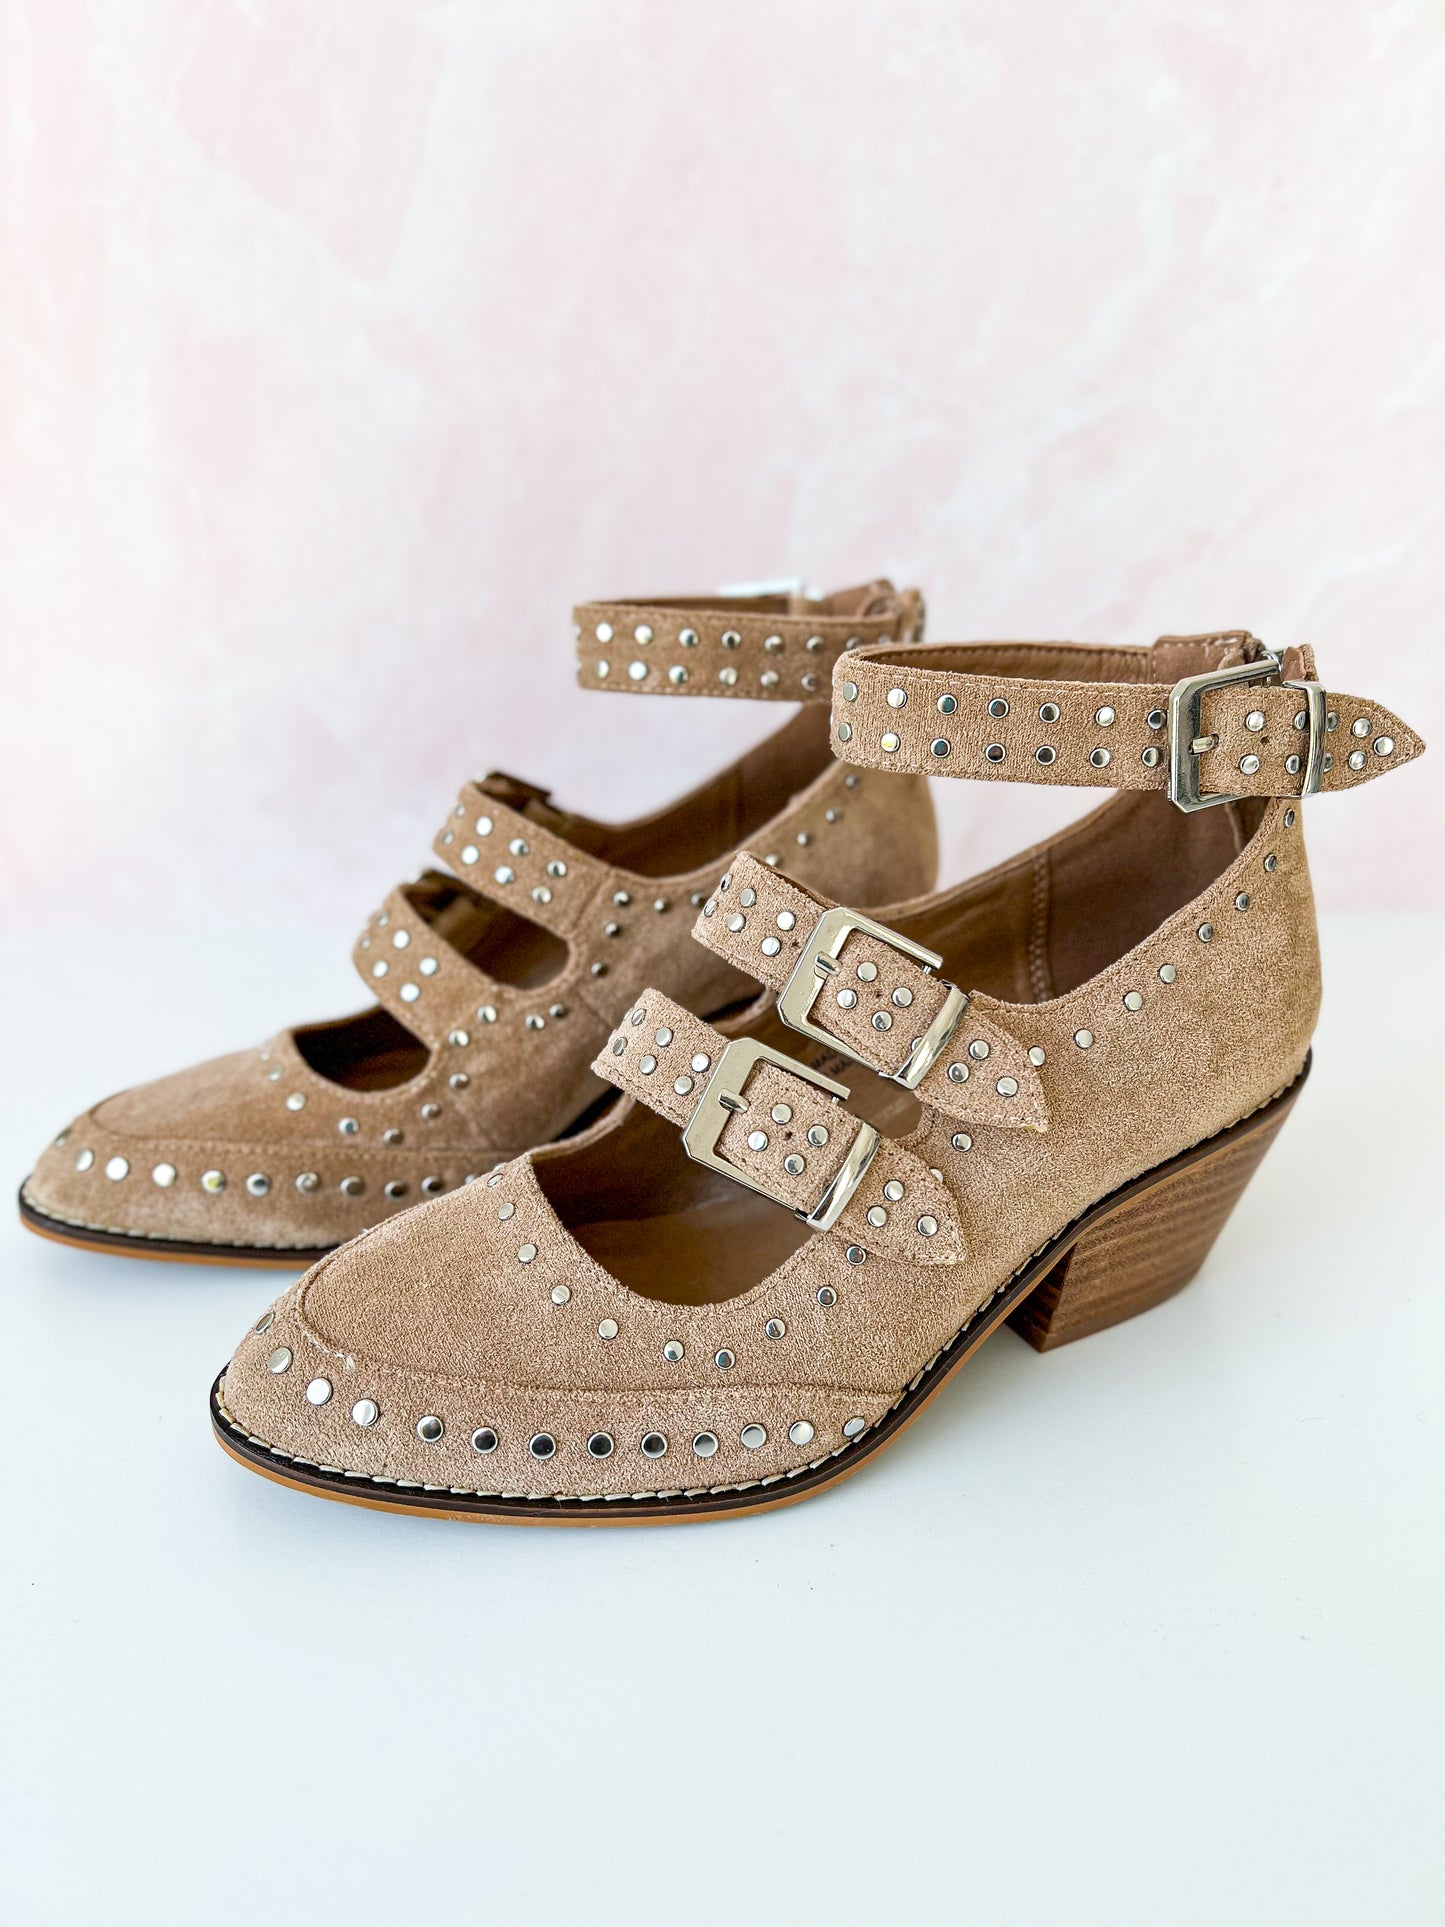 Corky's Cackle Wedge - Sand Suede  - Final Sale